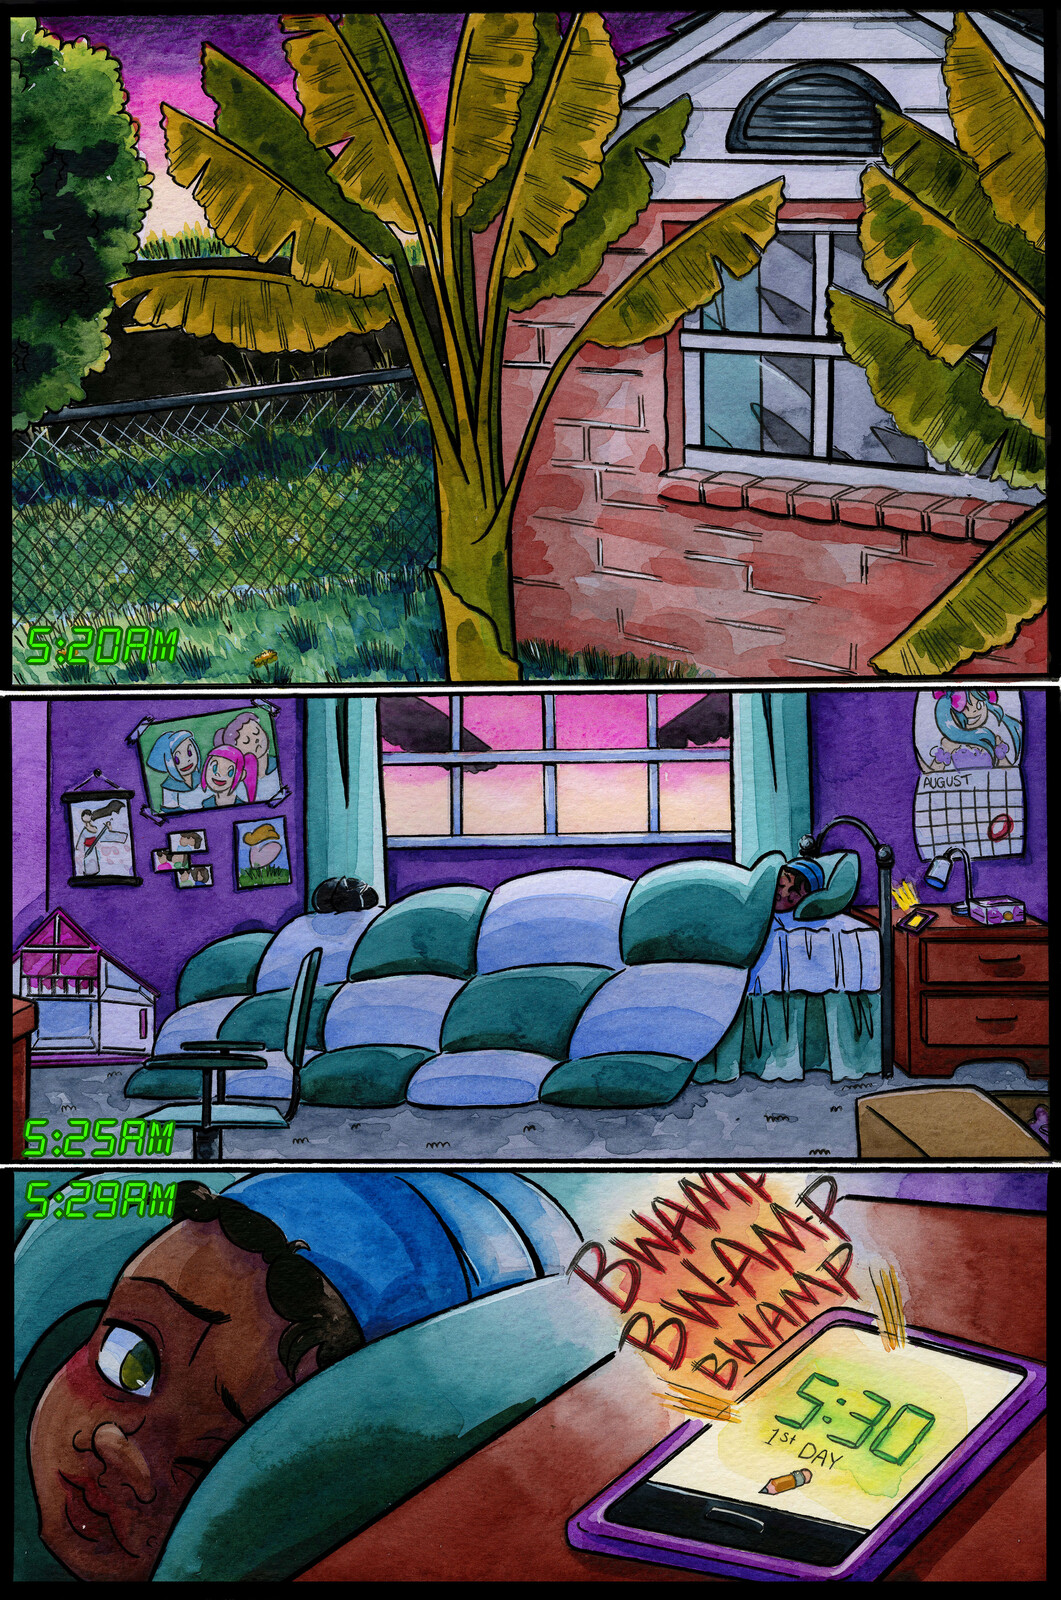 Sample Comic Page from Chapter 9 of 7" Kara